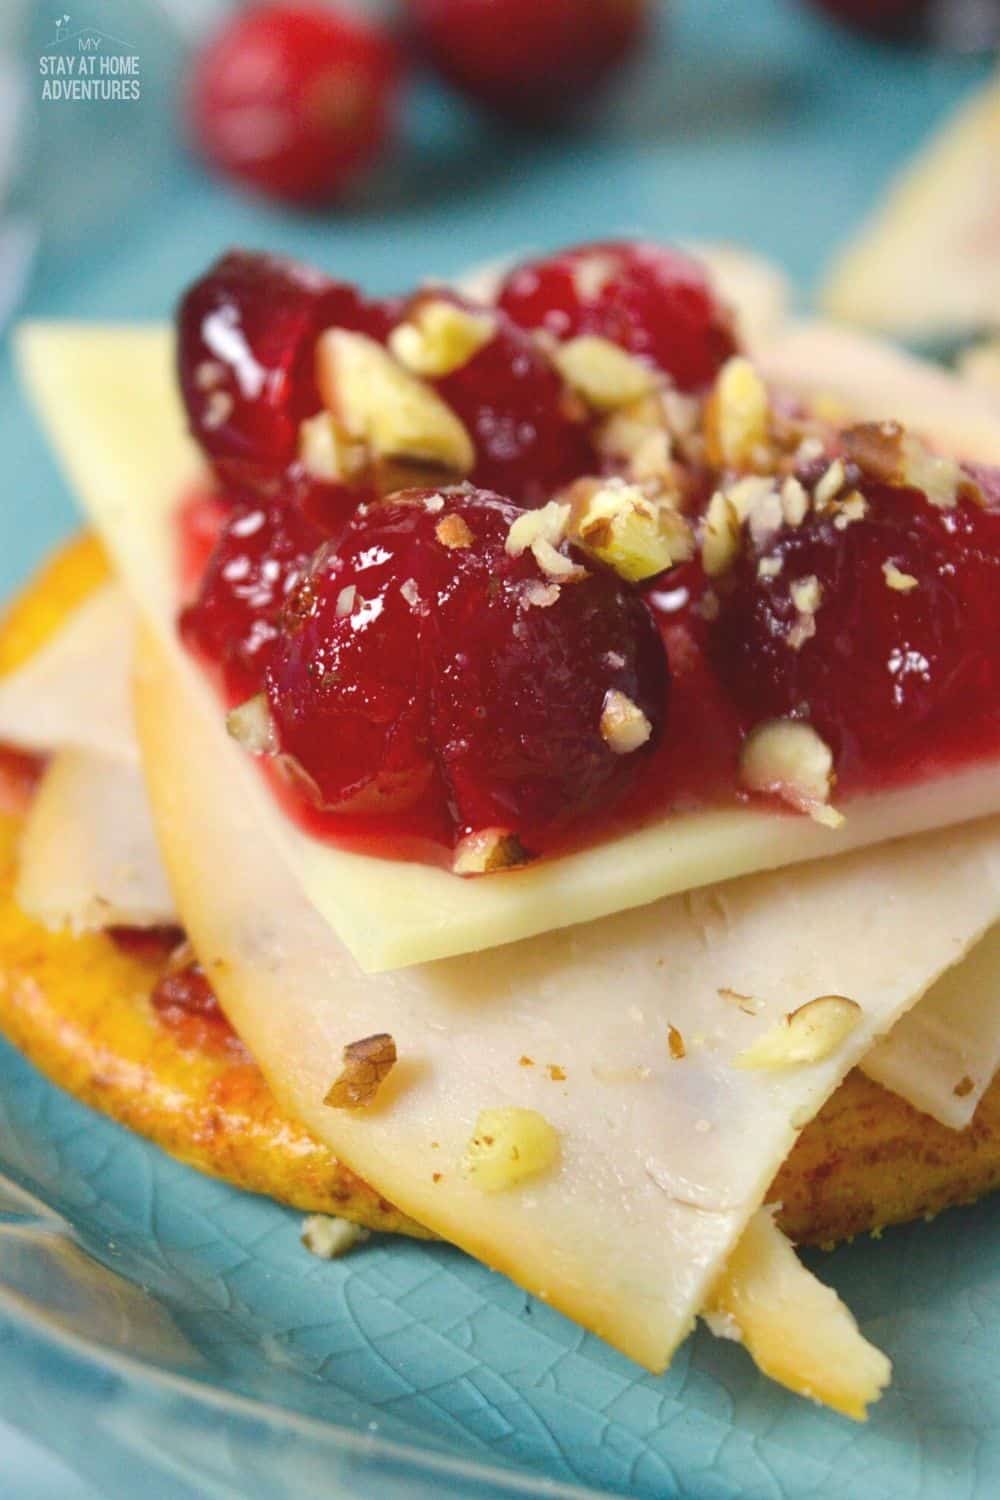 Learn how to make these simple Cranberry Cracker Bites that are great appetizers during your family gatherings. via @mystayathome